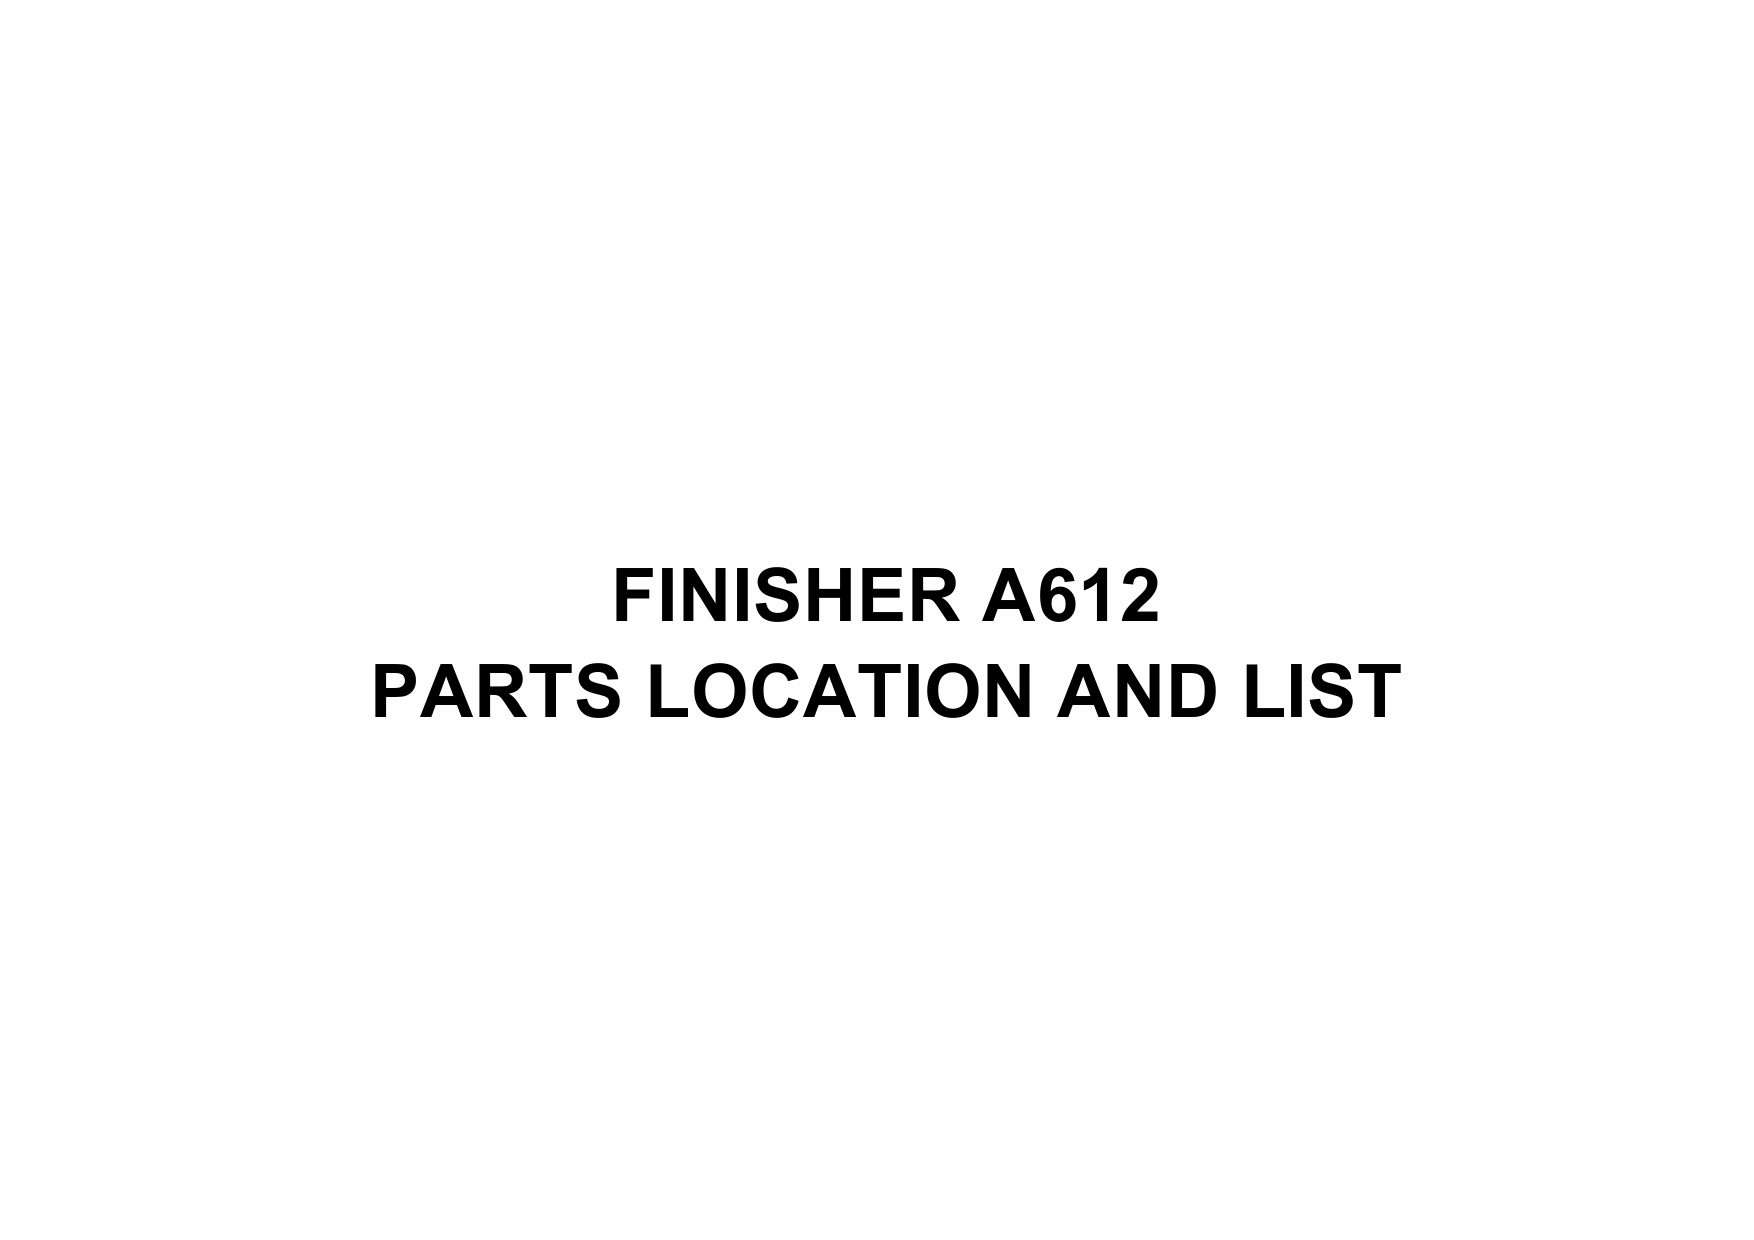 RICOH Options A612 FINISHER Parts Catalog PDF download-1